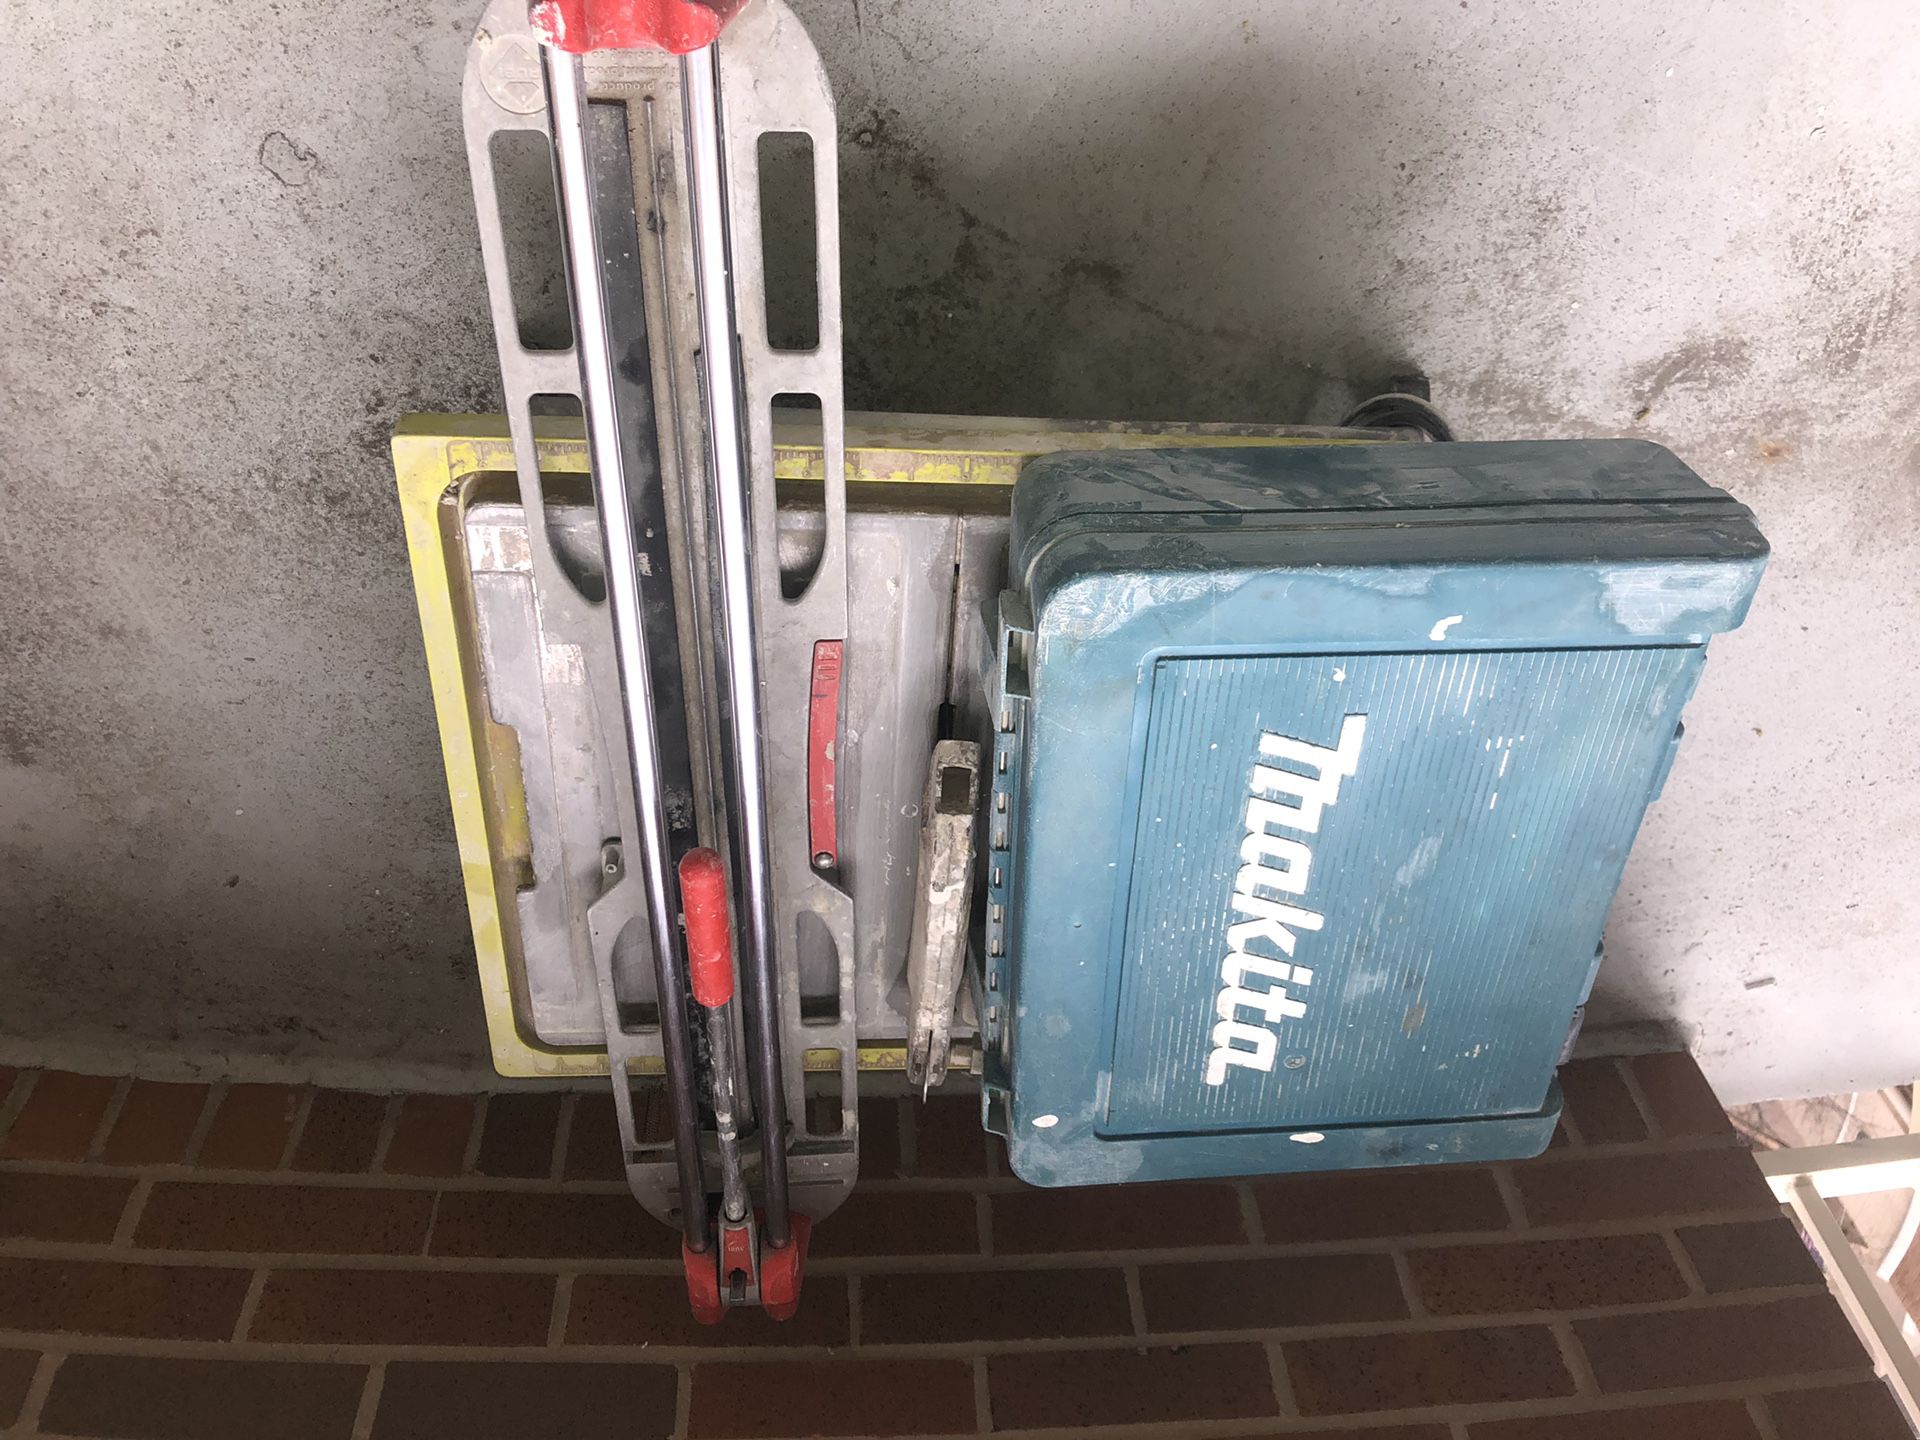 Tile cutter, wet saw, and makita hammer drill